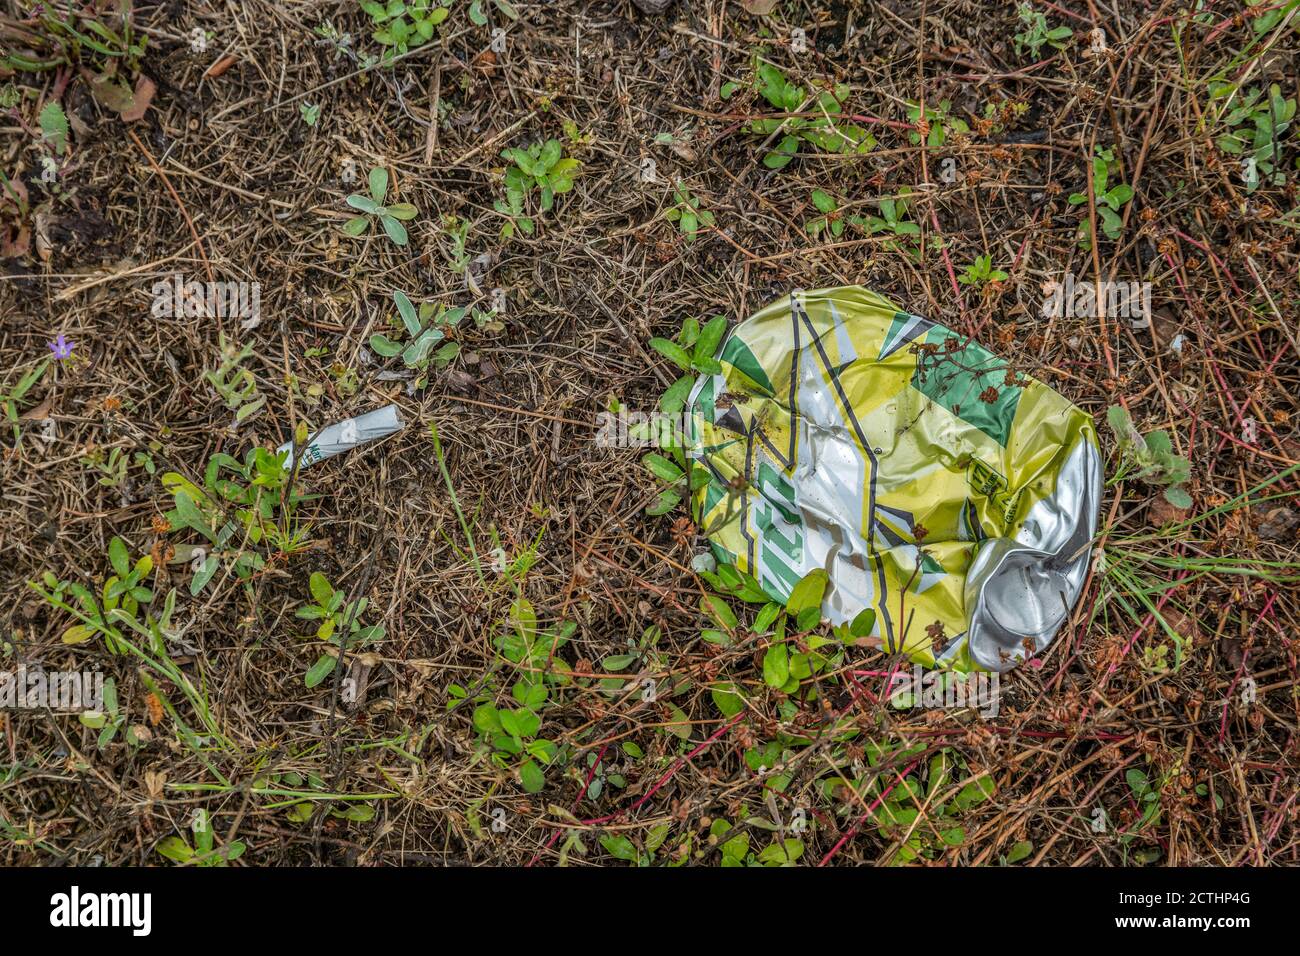 Crumpled up mountain dew soda can discarded on the ground in a field with a cigarette alongside polluting the environment Stock Photo